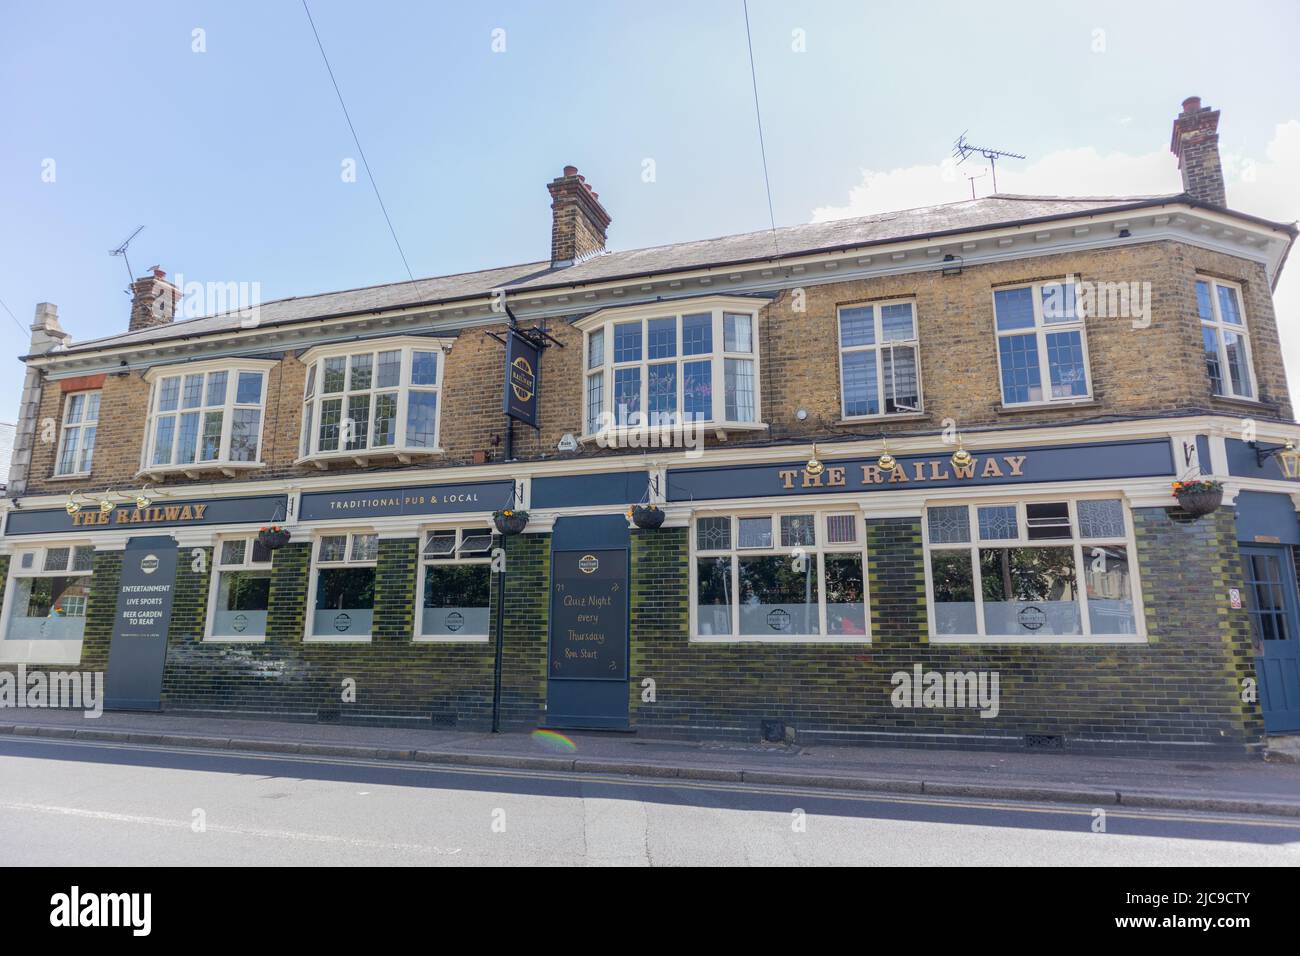 Southend on Sea, UK. 11th Jun, 2022. The Railway Pub, Prittlewell. Scenes near Prittlewell Station, Southend on Sea, the area Simon Dobbin was left with permanent brain damage following an assault after a Southend Utd vs Cambridge Utd match on 21st March, 2015. Mr Dobbin died on 21st October, 2020. He was 48 years old. Earlier in the week, 10th June 2022, Essex Police arrested five men in connection with the assault. Penelope Barritt/Alamy Live News Stock Photo